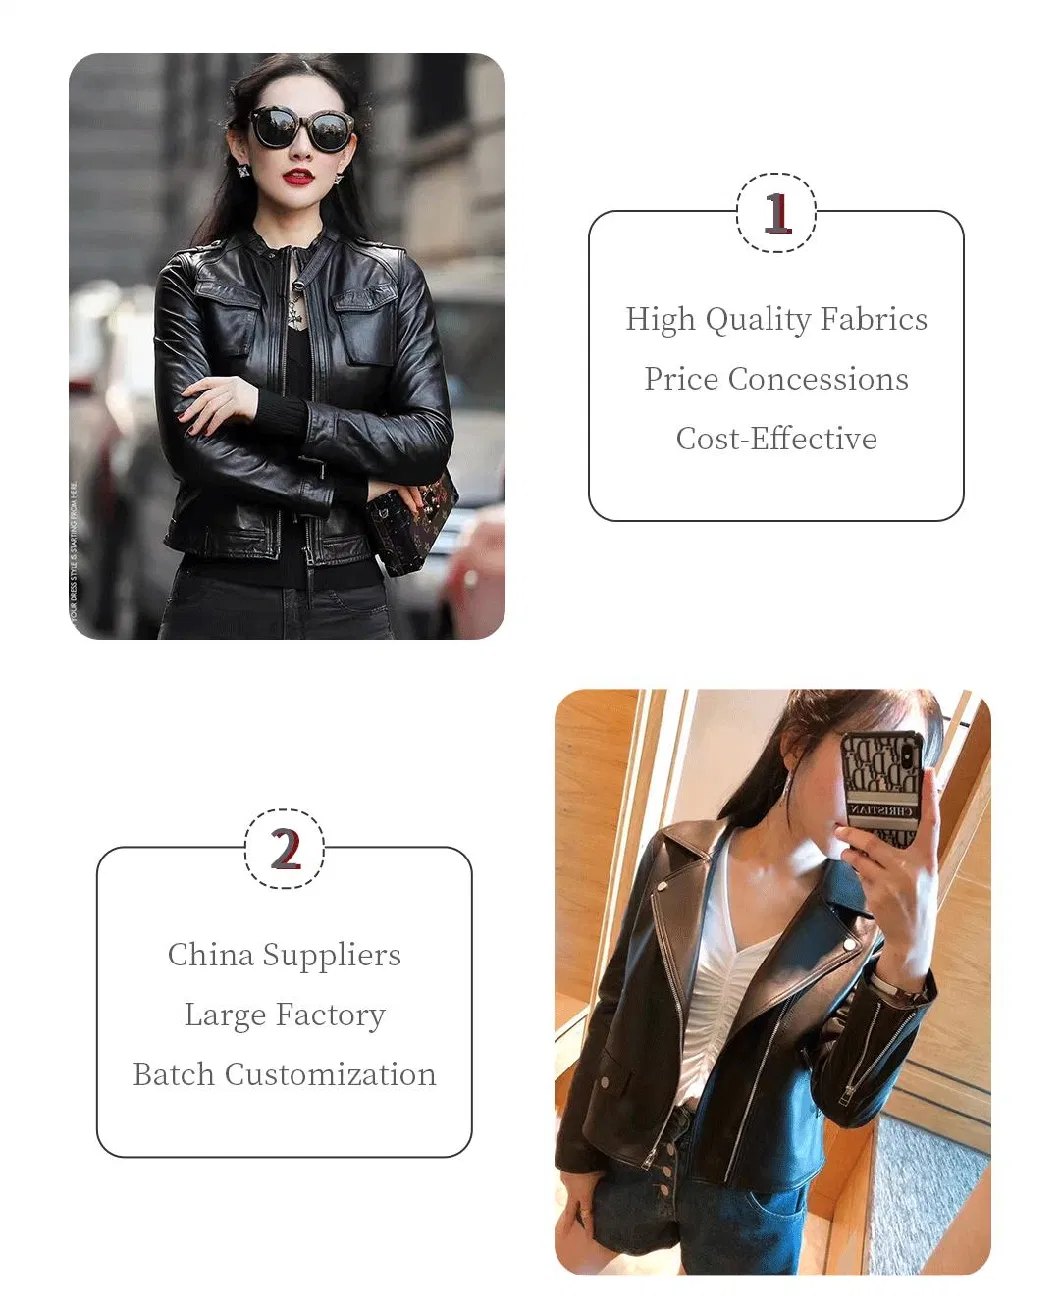 China Supplier Women Leather PU Jacket Outerwear Casual Jacket Female Winter Fashion Leather Jacket Women Motorcycle Winter Jacket Chaqueta De Motocicleta